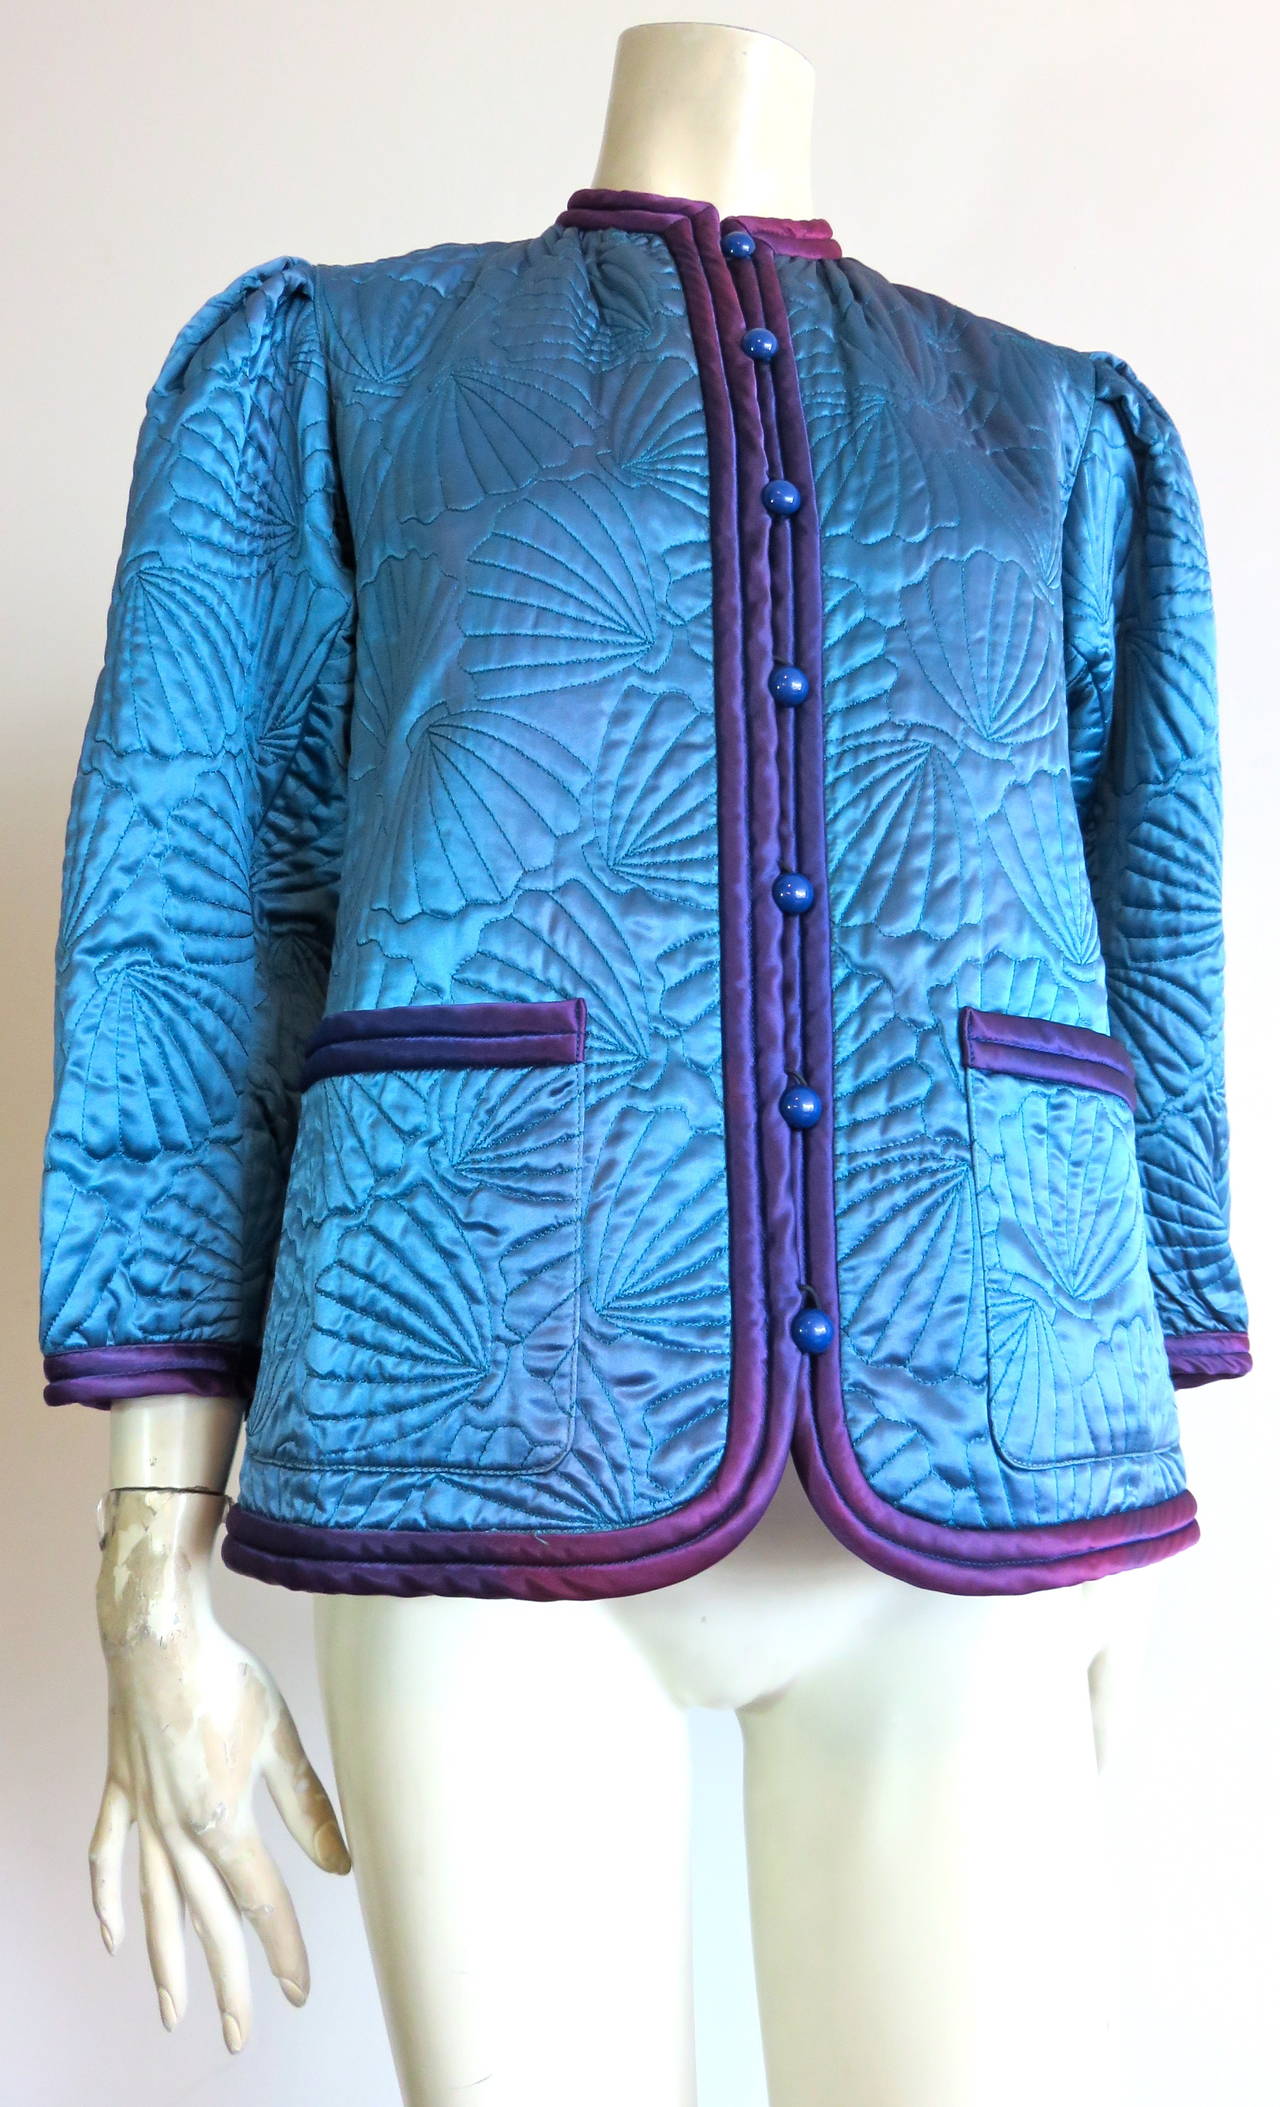 Beautiful, 1970's, YVES SAINT LAURENT Turquoise satin jacket with twin, purple corded trim detail.

Signature YSL jacket silhouette during the 1970's.

All-over, scallop-shell design, quilt-stitching with light padding within the